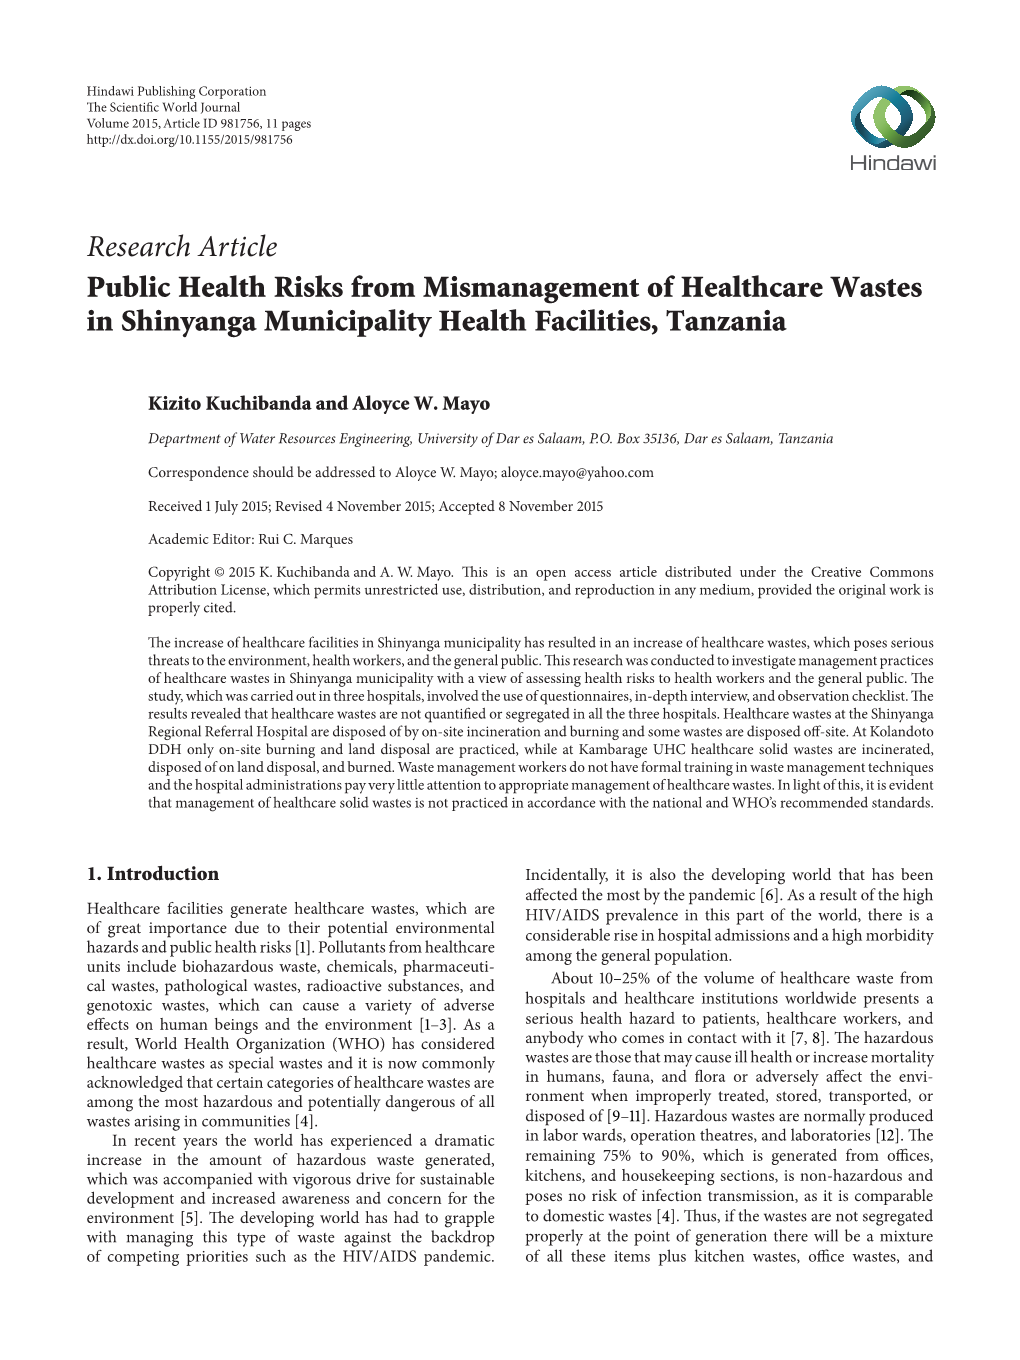 Research Article Public Health Risks from Mismanagement of Healthcare Wastes in Shinyanga Municipality Health Facilities, Tanzania